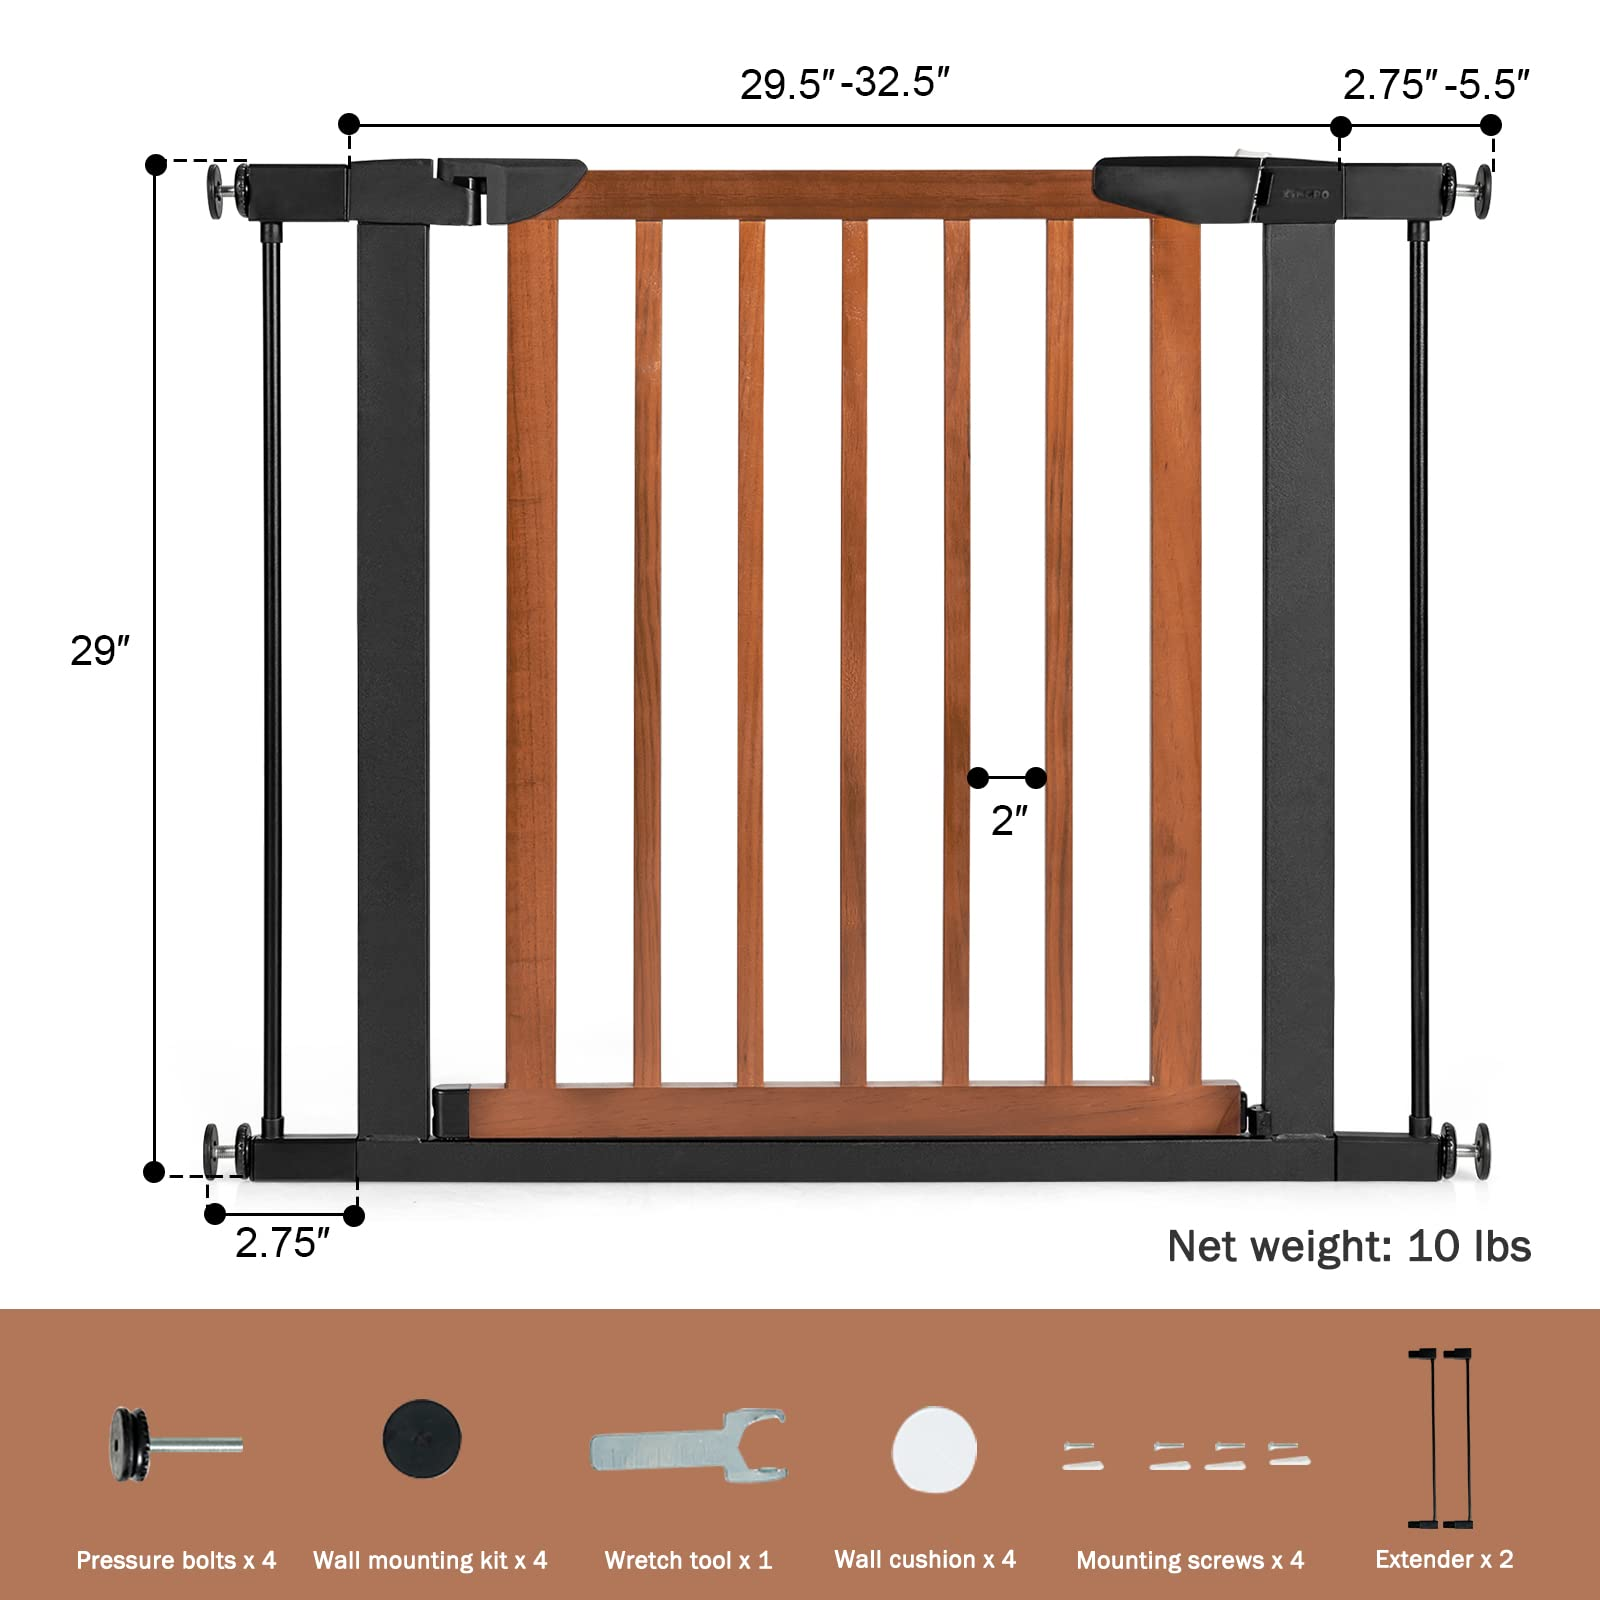 Giantex Walk Through Pet Safety Gate, Fit Opening 29.5'' to 38'' Wide